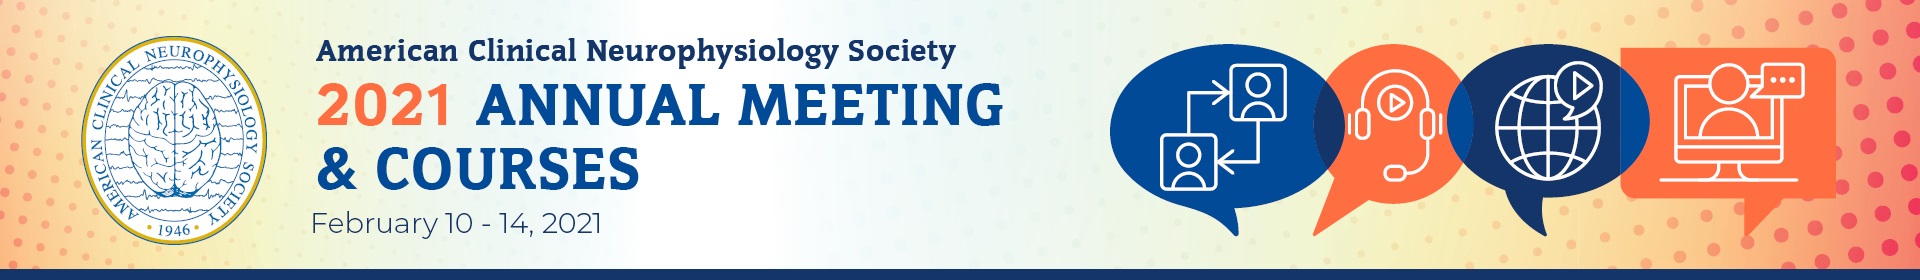 2021 Annual Meeting and Courses Event Banner